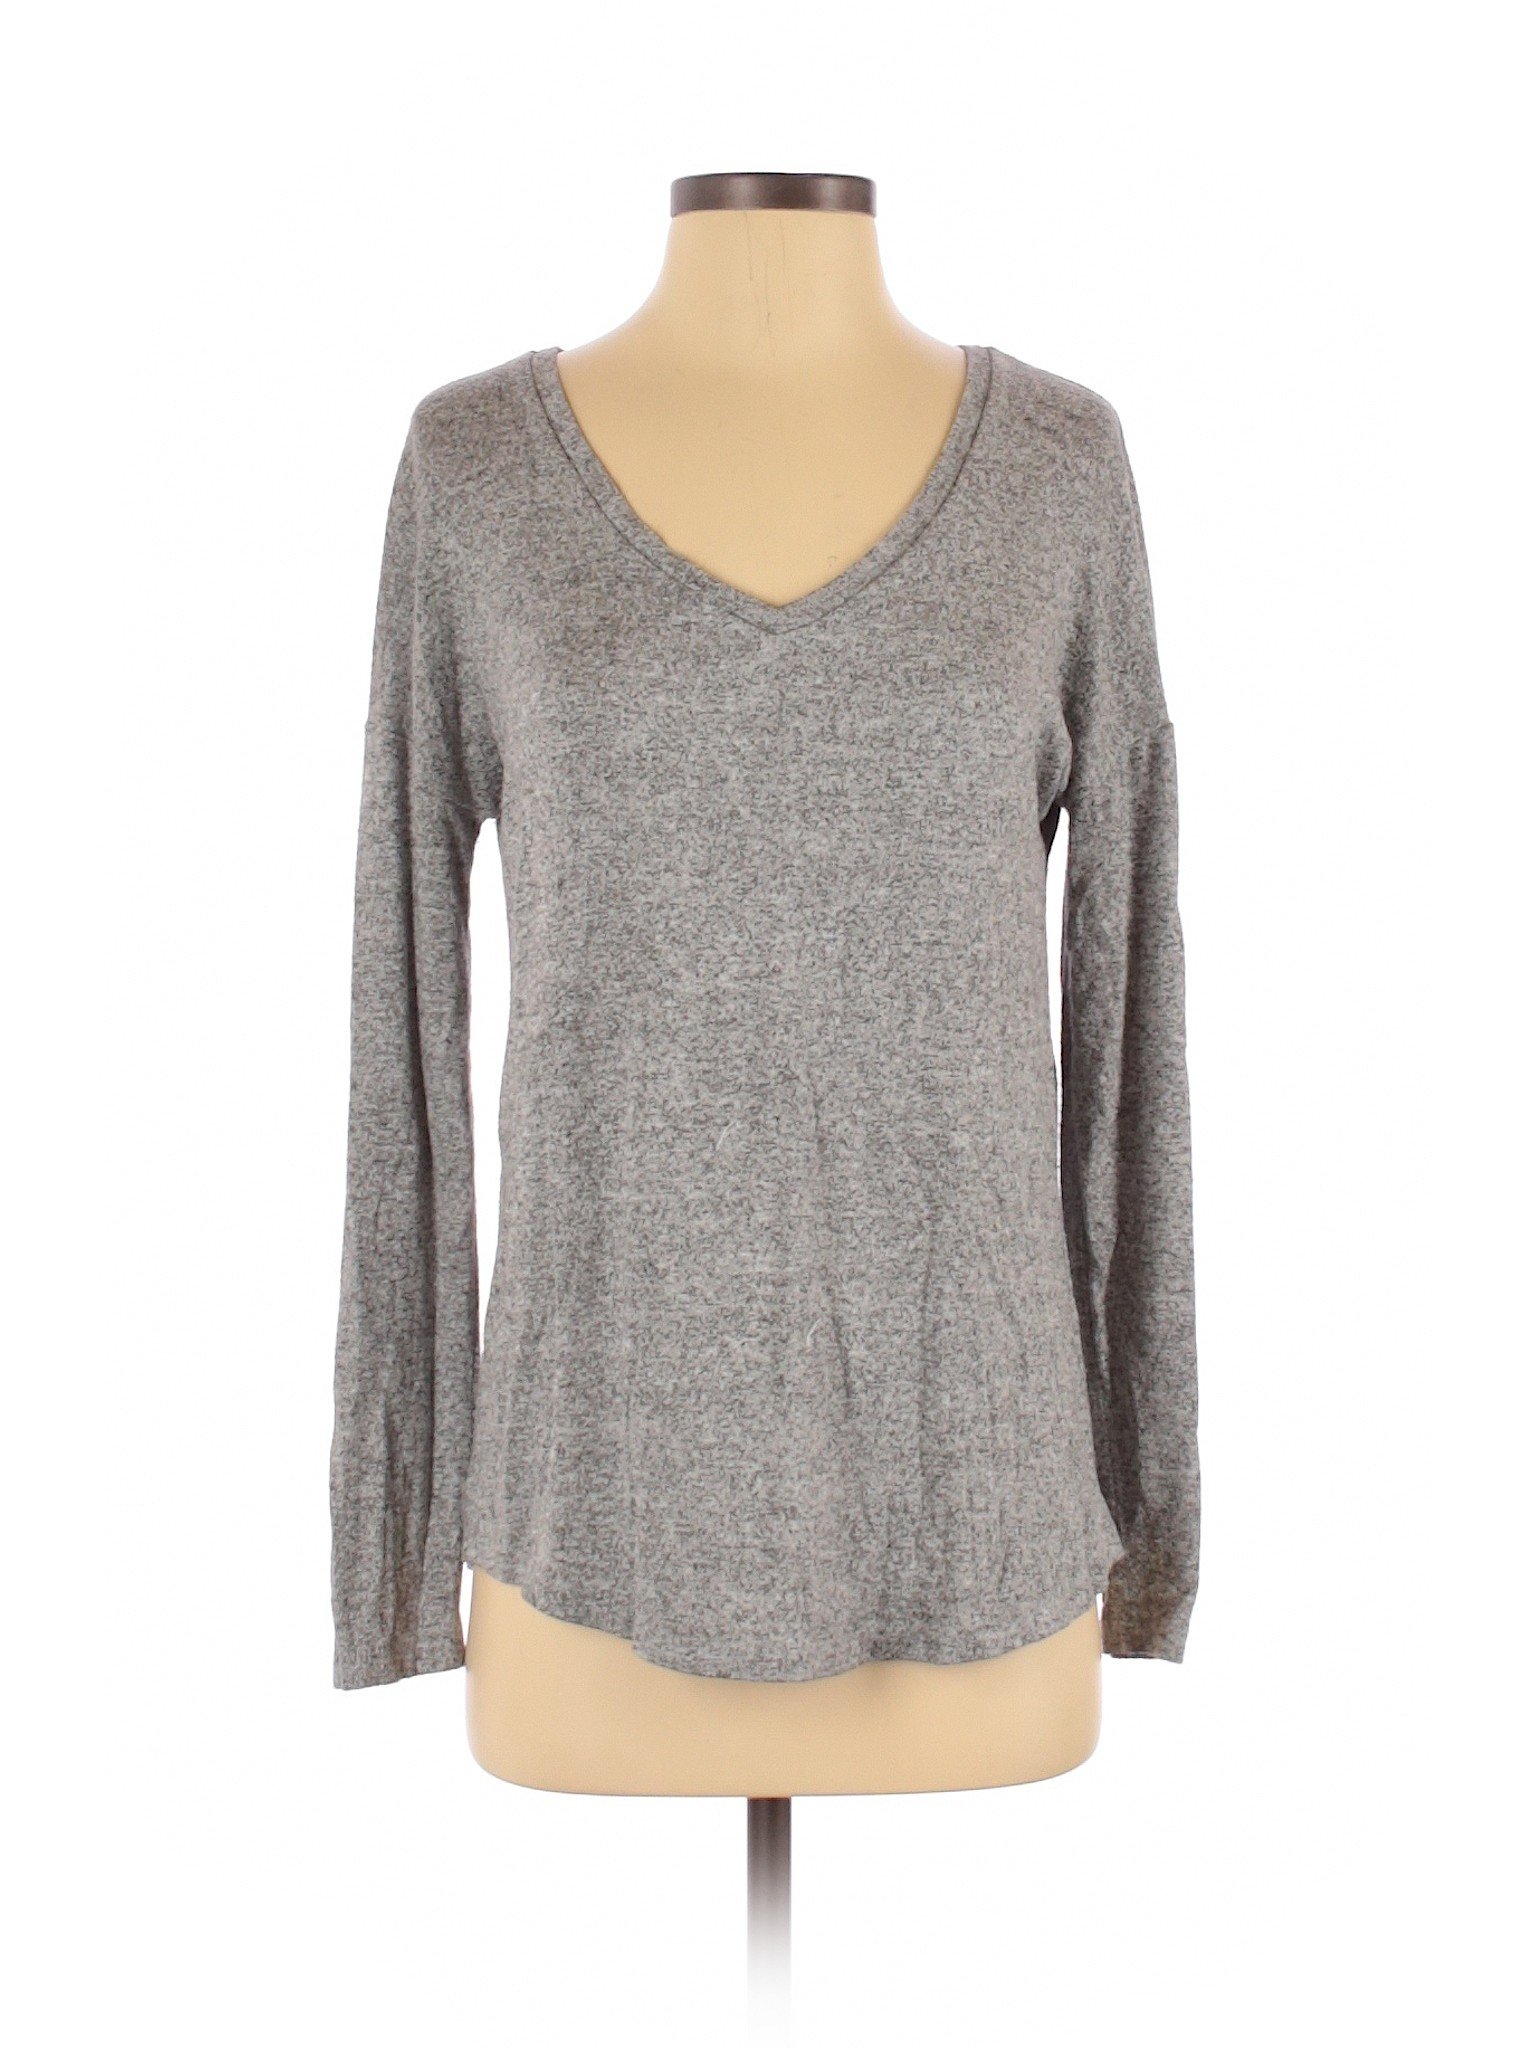 A New Day Women Gray Pullover Sweater S | eBay